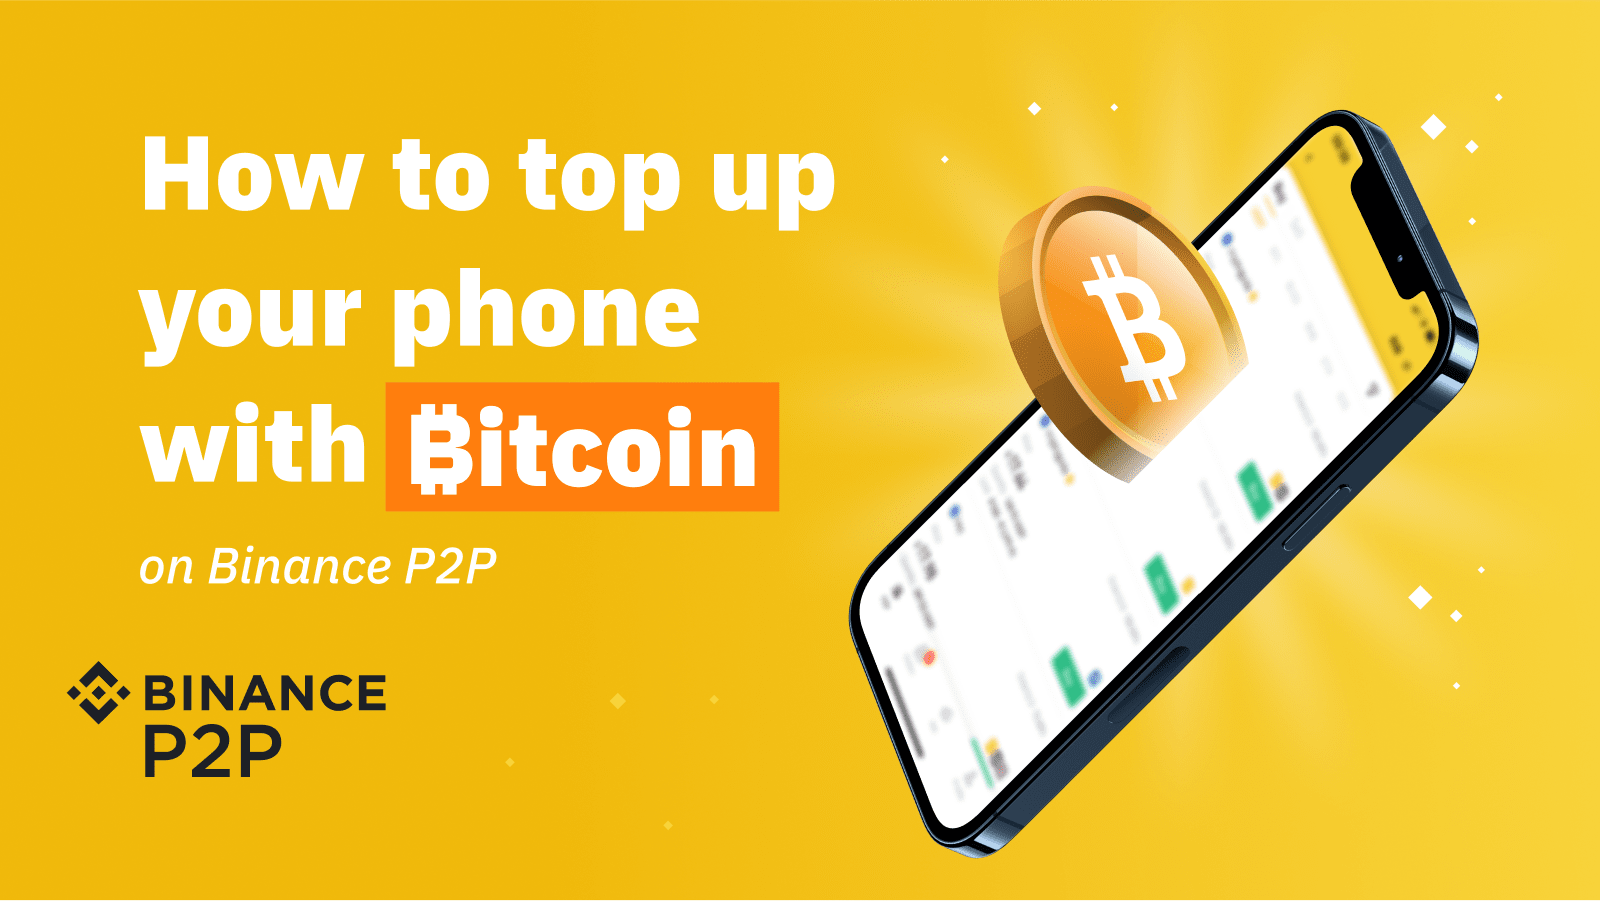 How to Top Up Your Mobile Phone with Bitcoin on Binance P2P